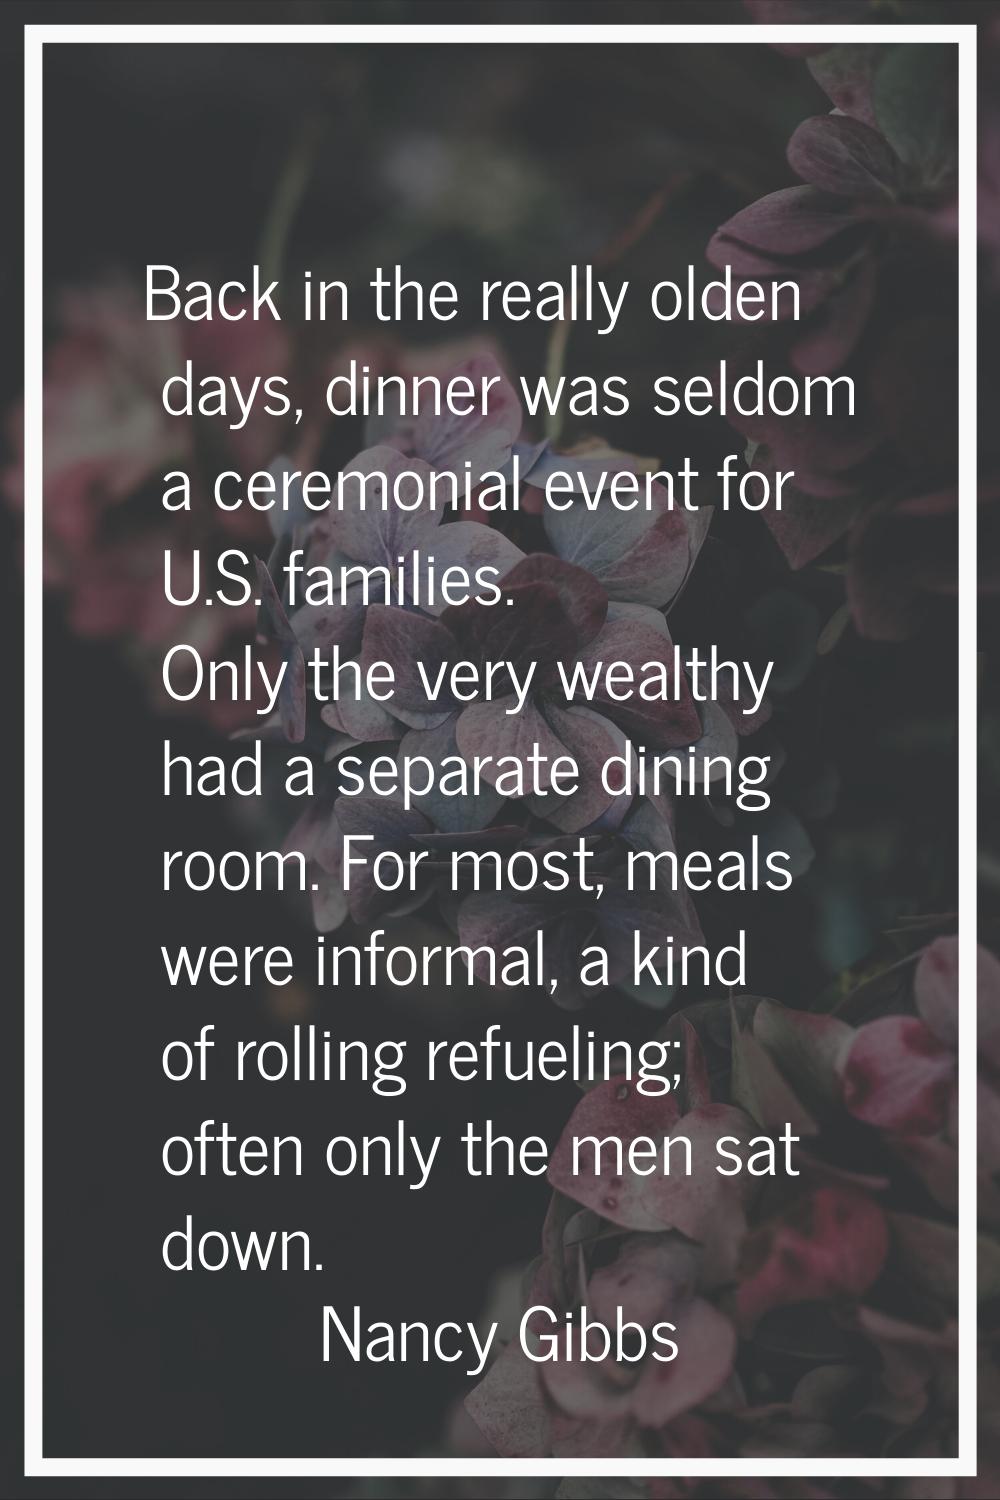 Back in the really olden days, dinner was seldom a ceremonial event for U.S. families. Only the ver